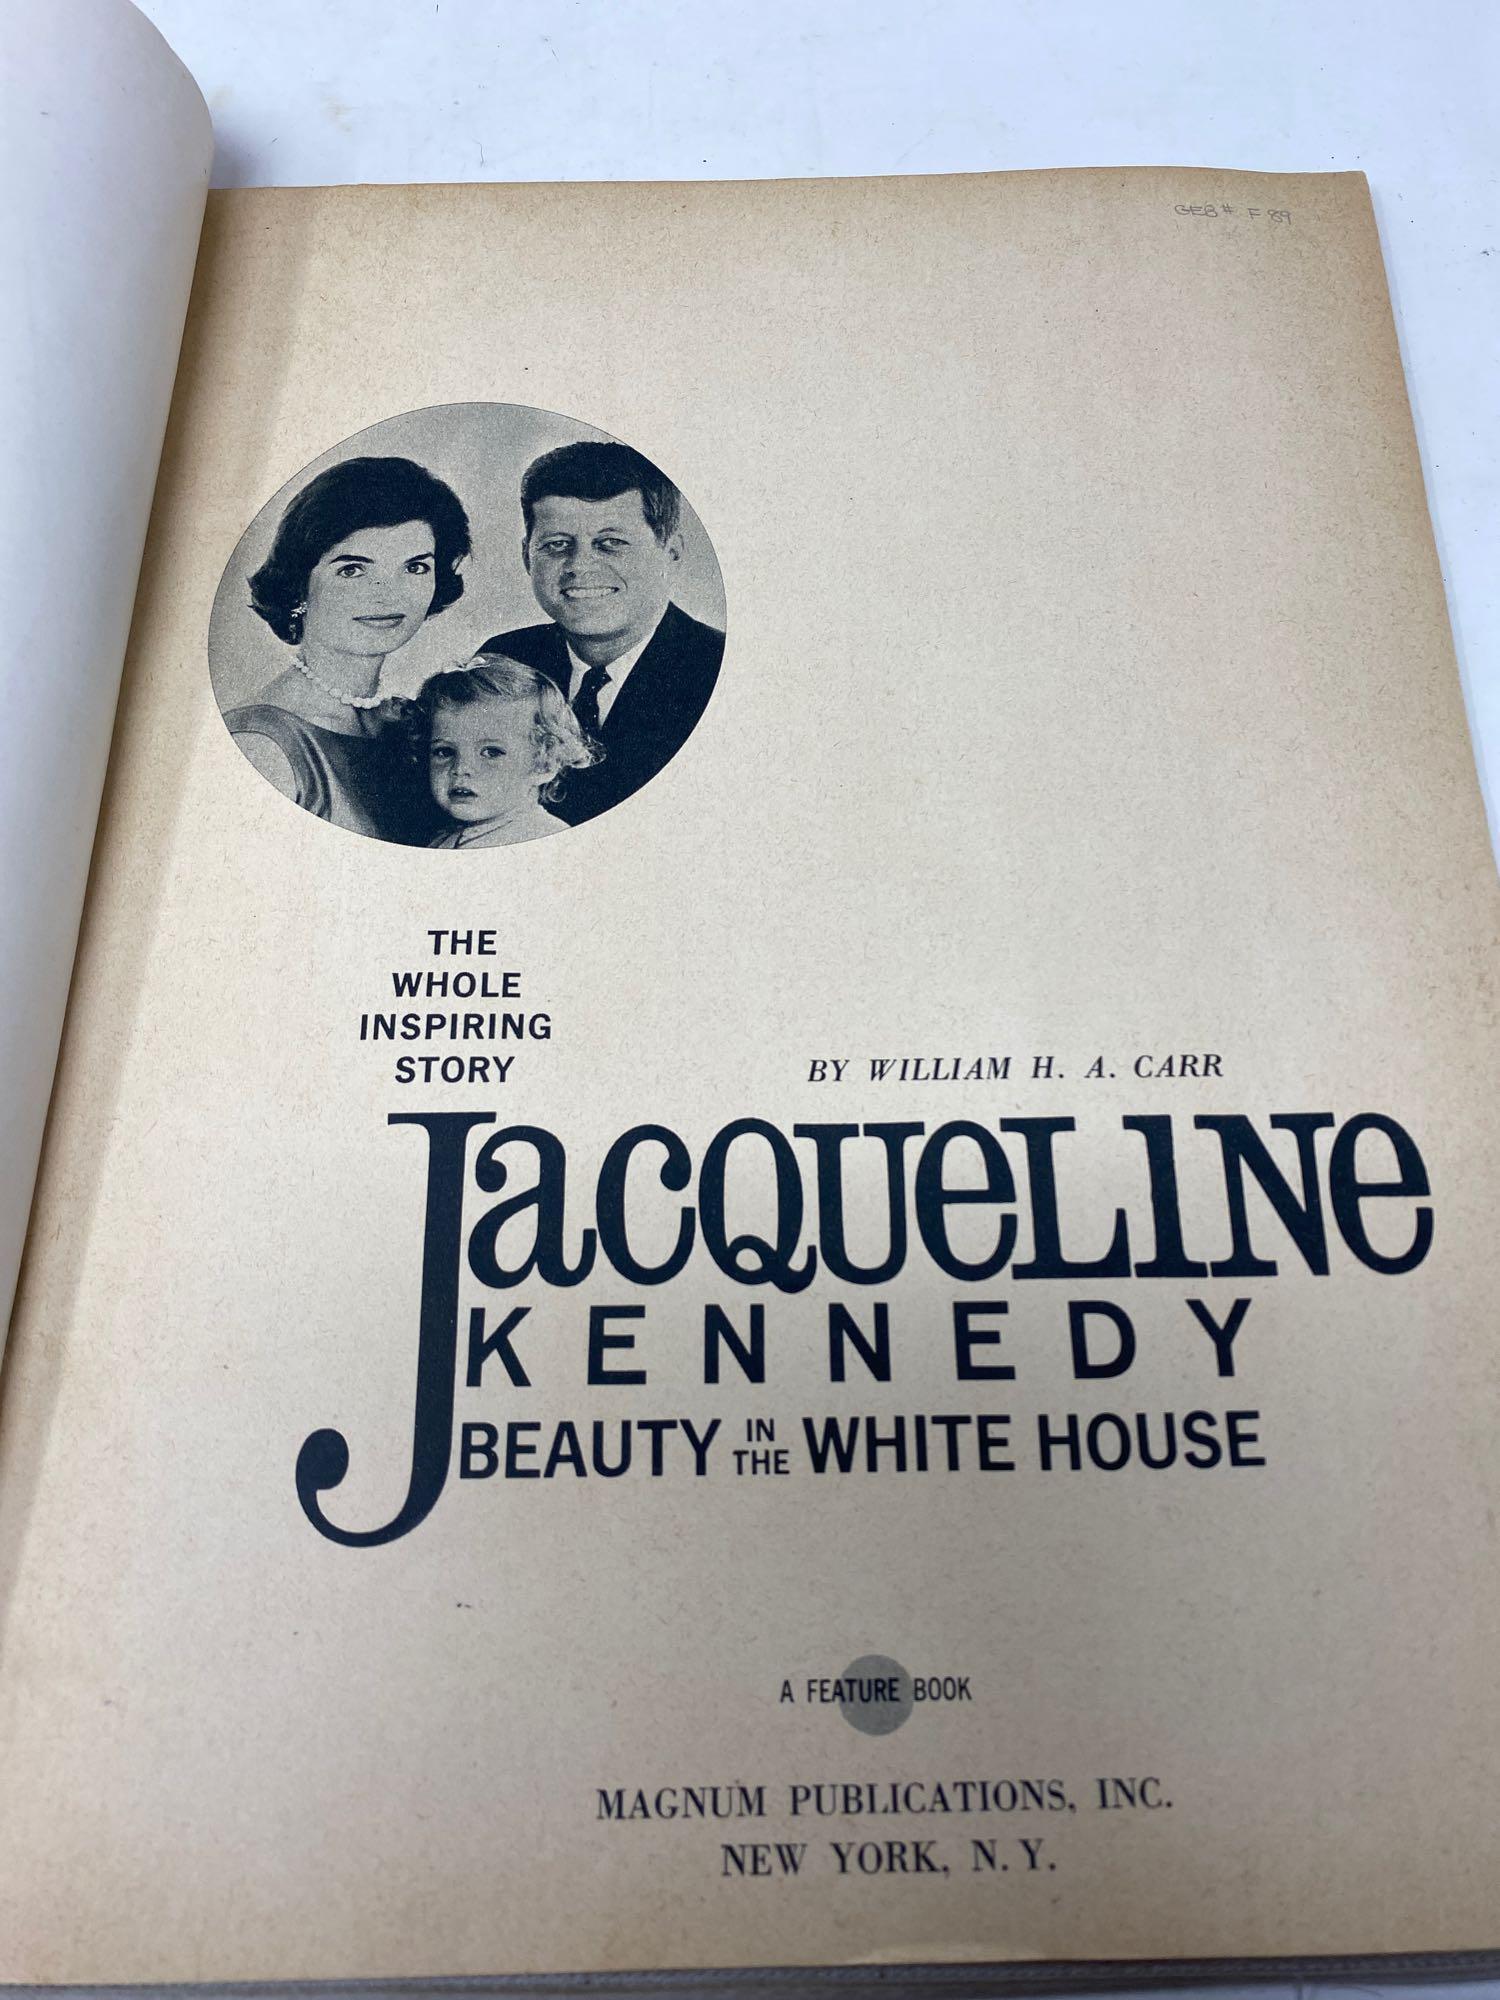 Vintage Books about The Kennedys